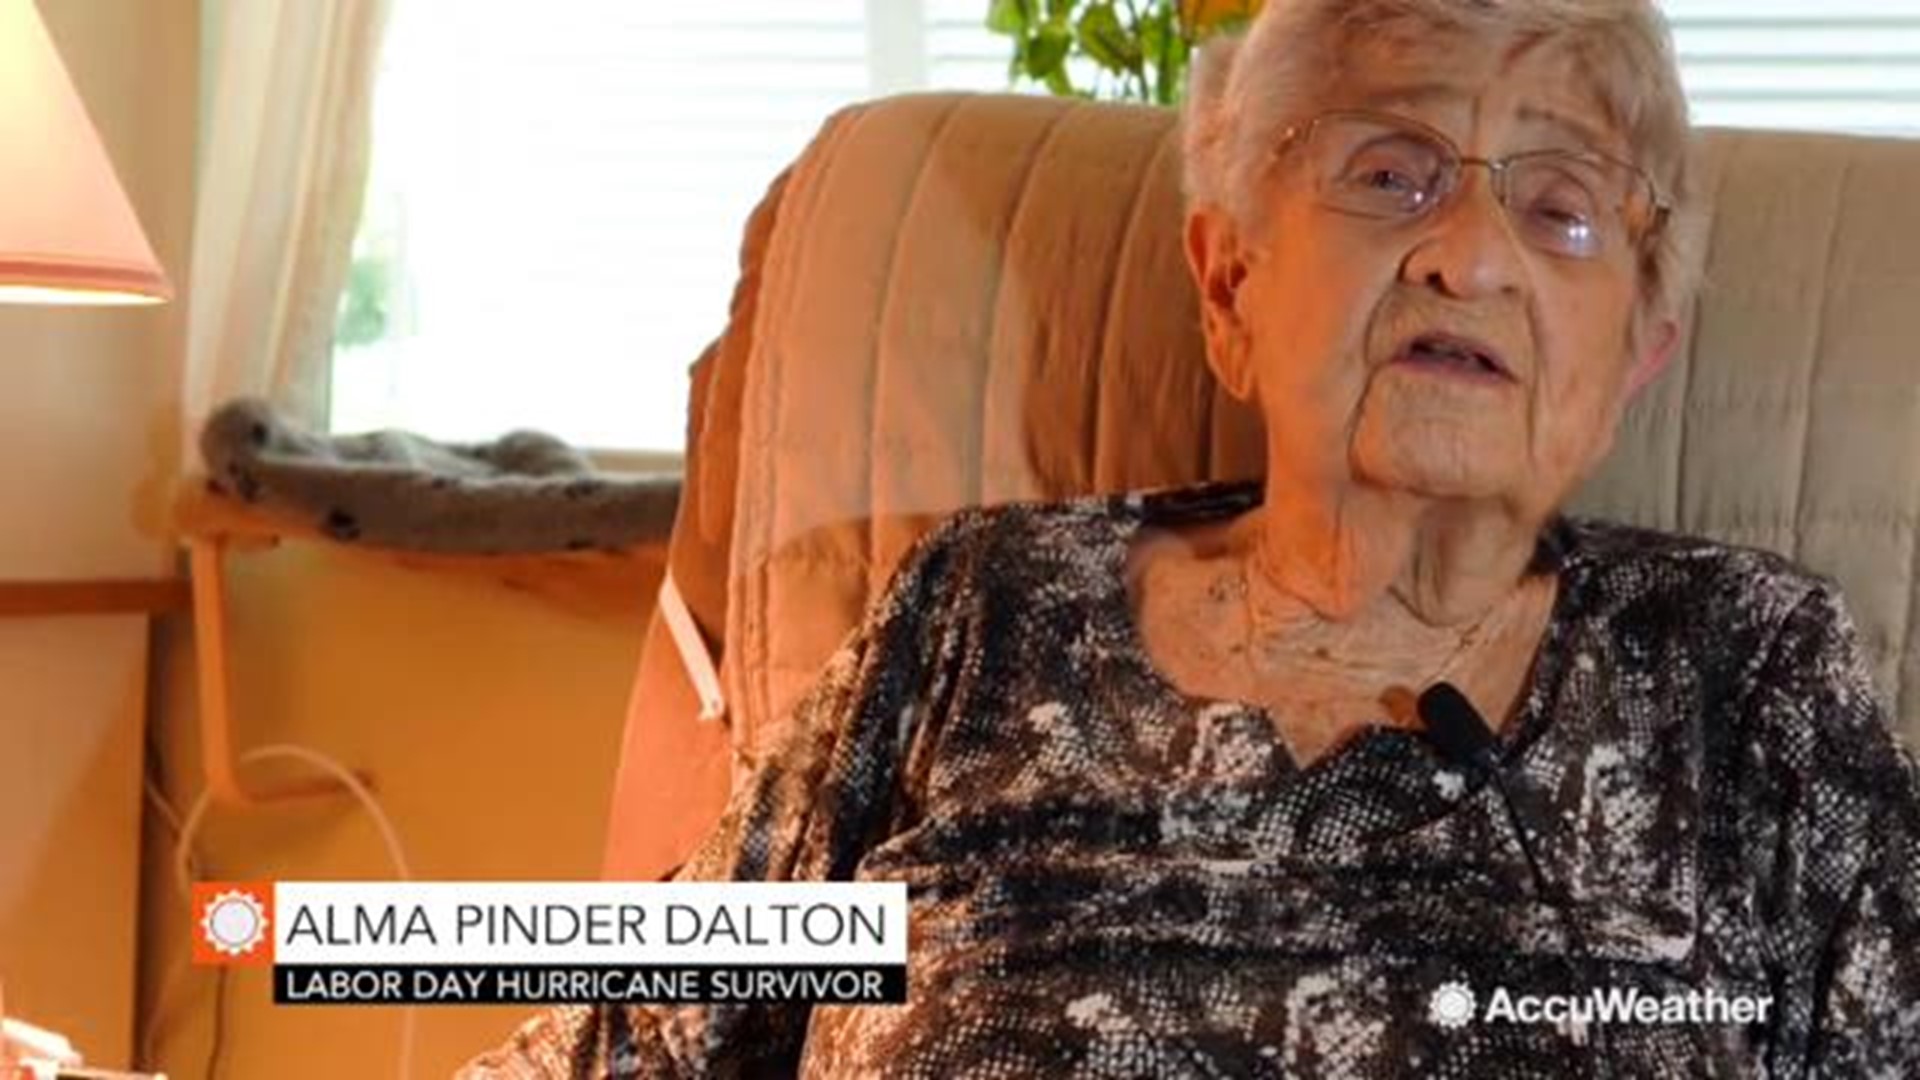 AccuWeather reporter Jonathan Petramala visited a survivor of the 1935 Labor Day Hurricane that devastated the Florida Keys.  She shares her own experience from the storm and her hopes that no one will ever have to deal with such a powerful storm again.